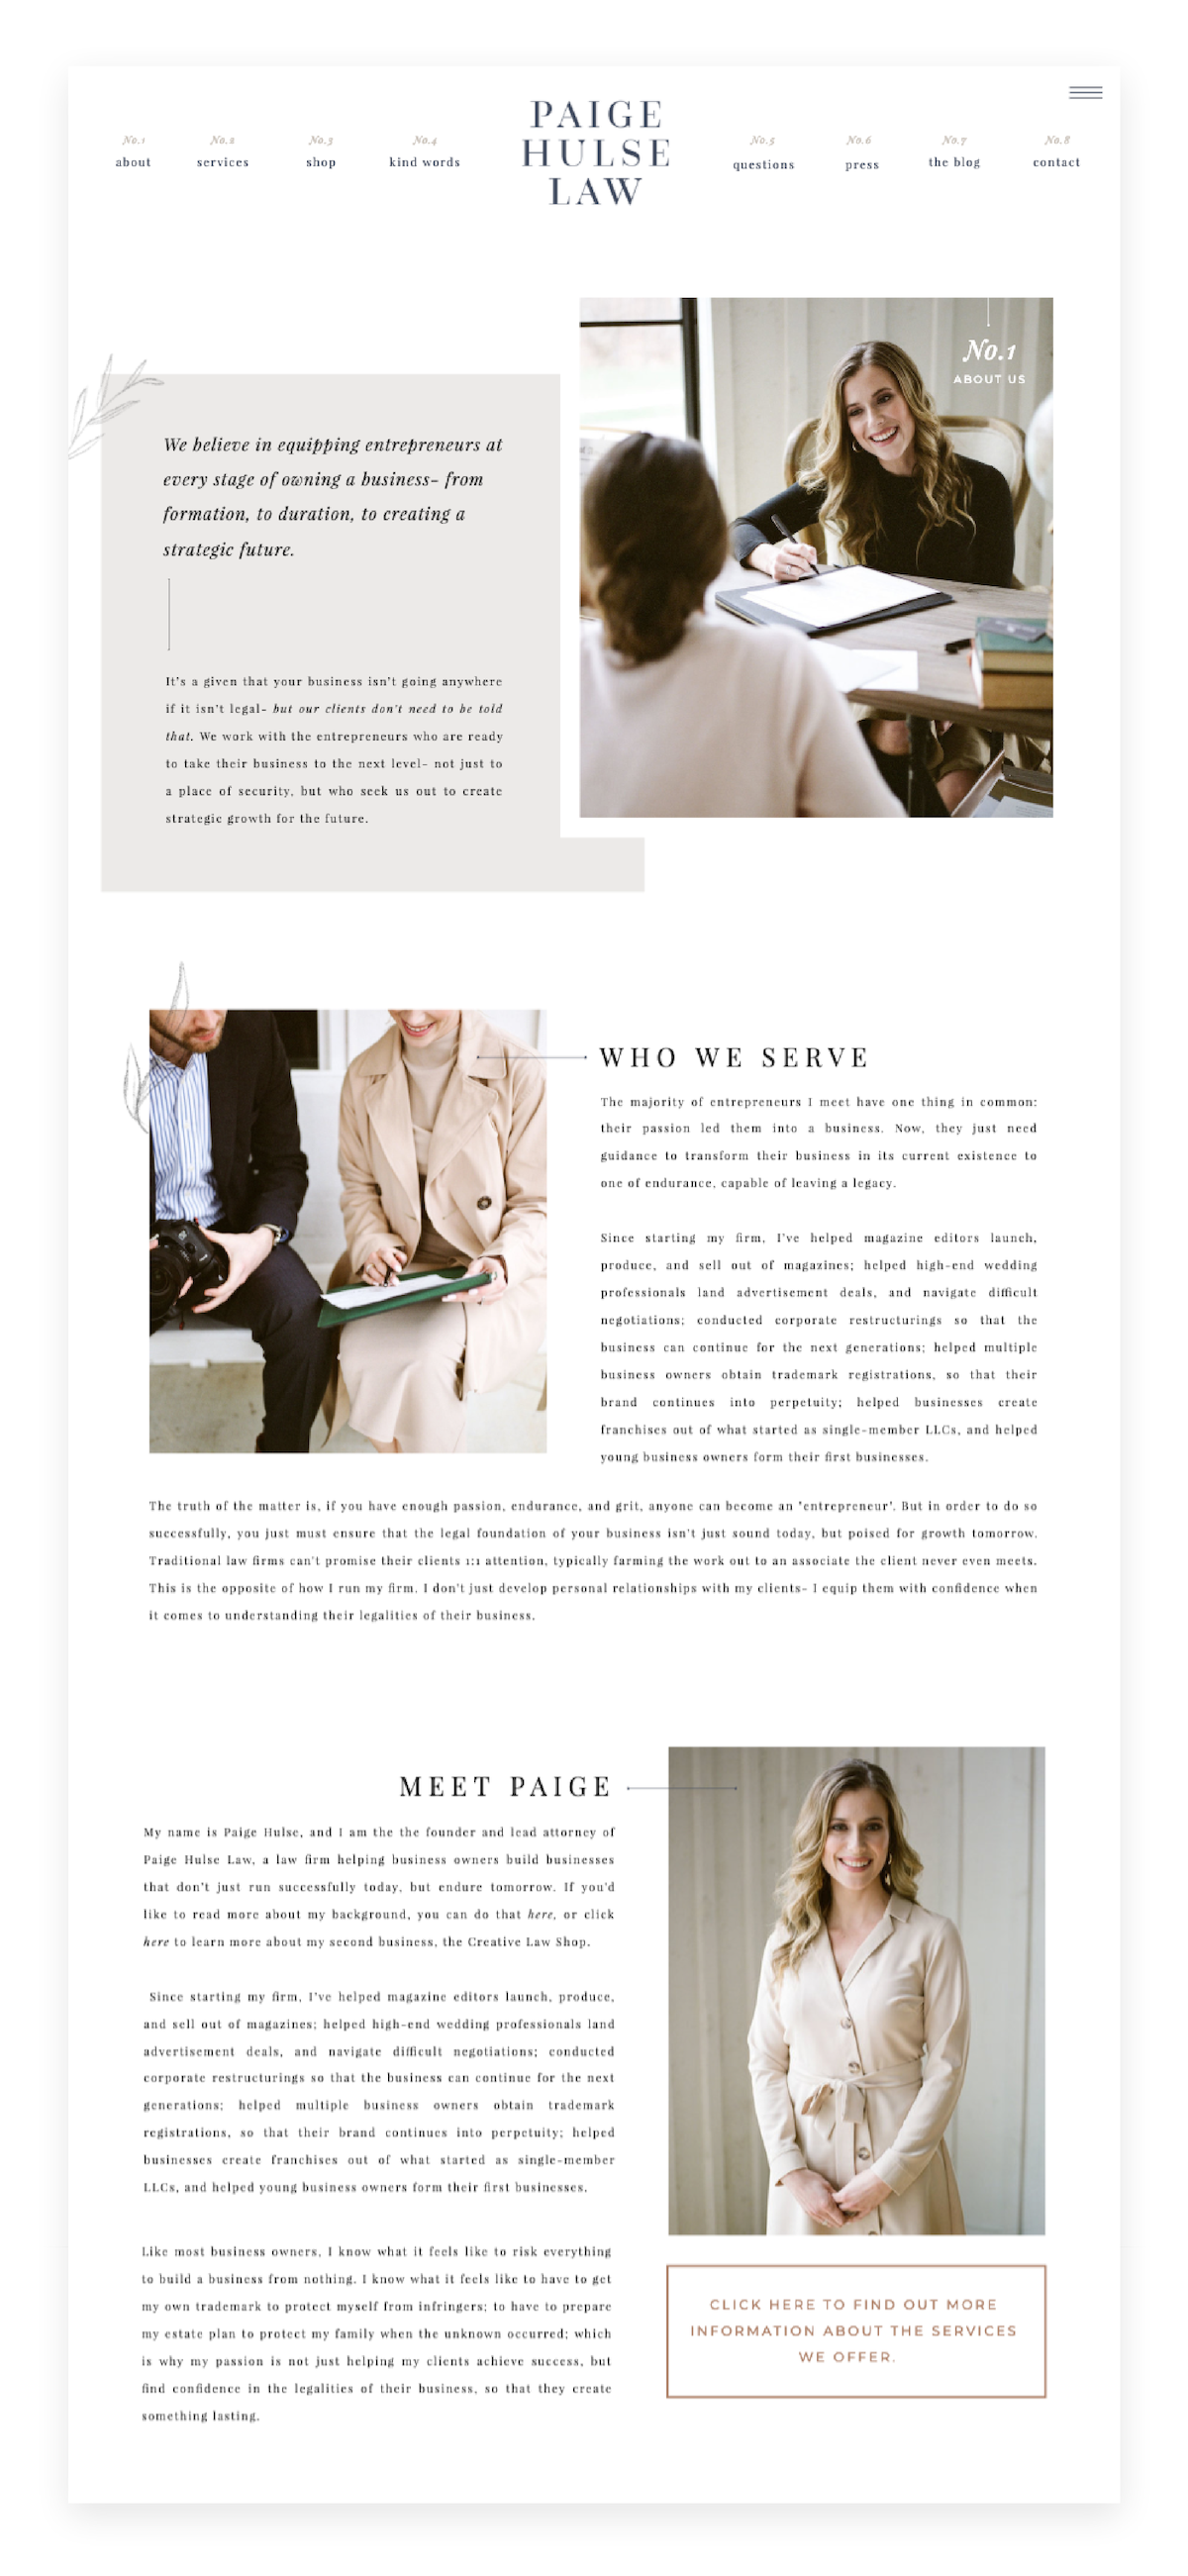 Website Template Showcase for Paige Hulse Law